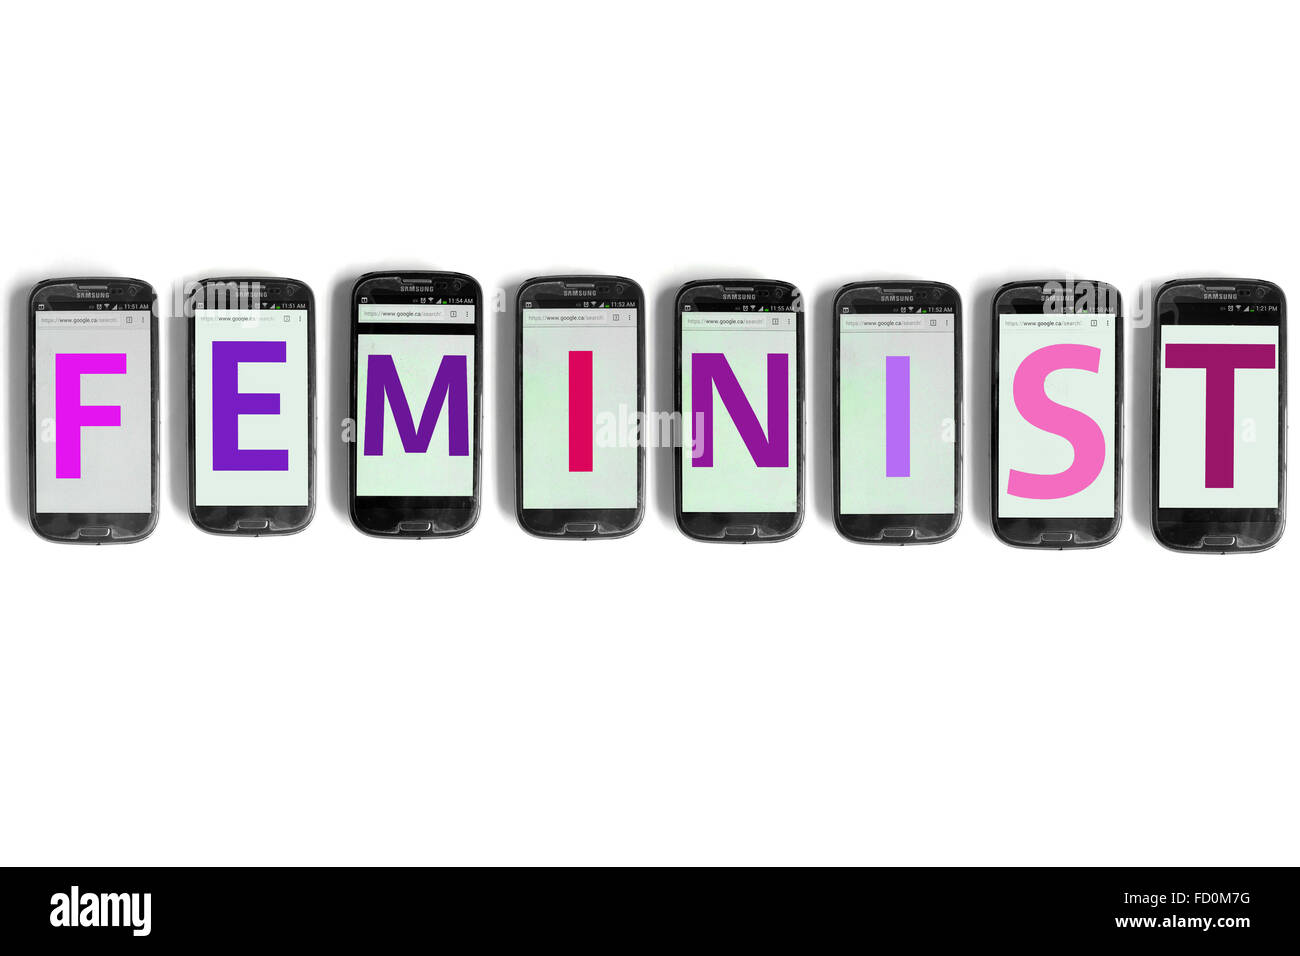 Feminist  on the screens of smartphones photographed against a white background. Stock Photo